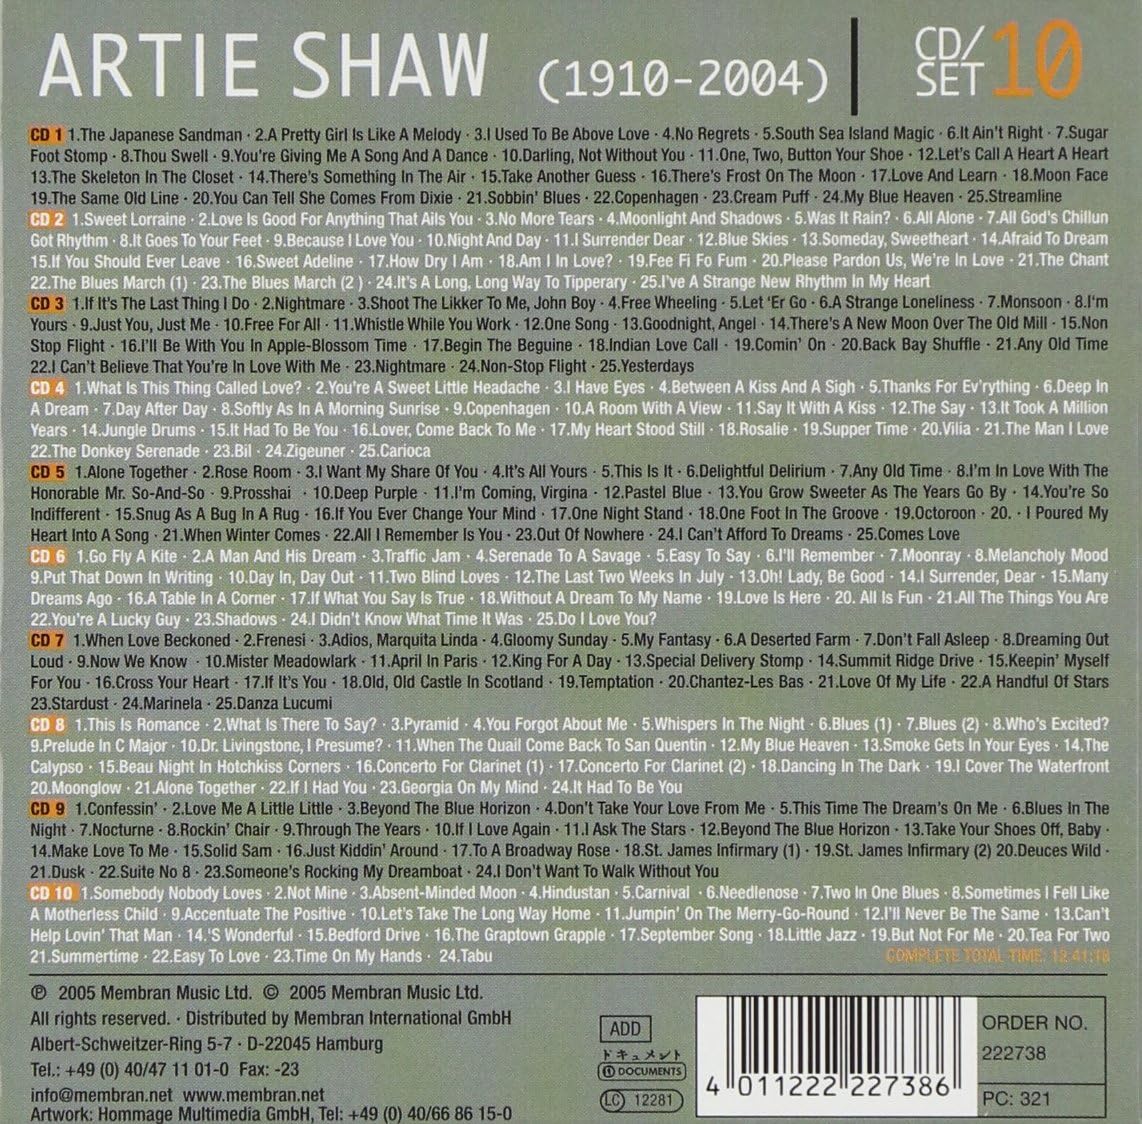 USED 10CD - Artie Shaw: Begin the Beguine (1909-2004)